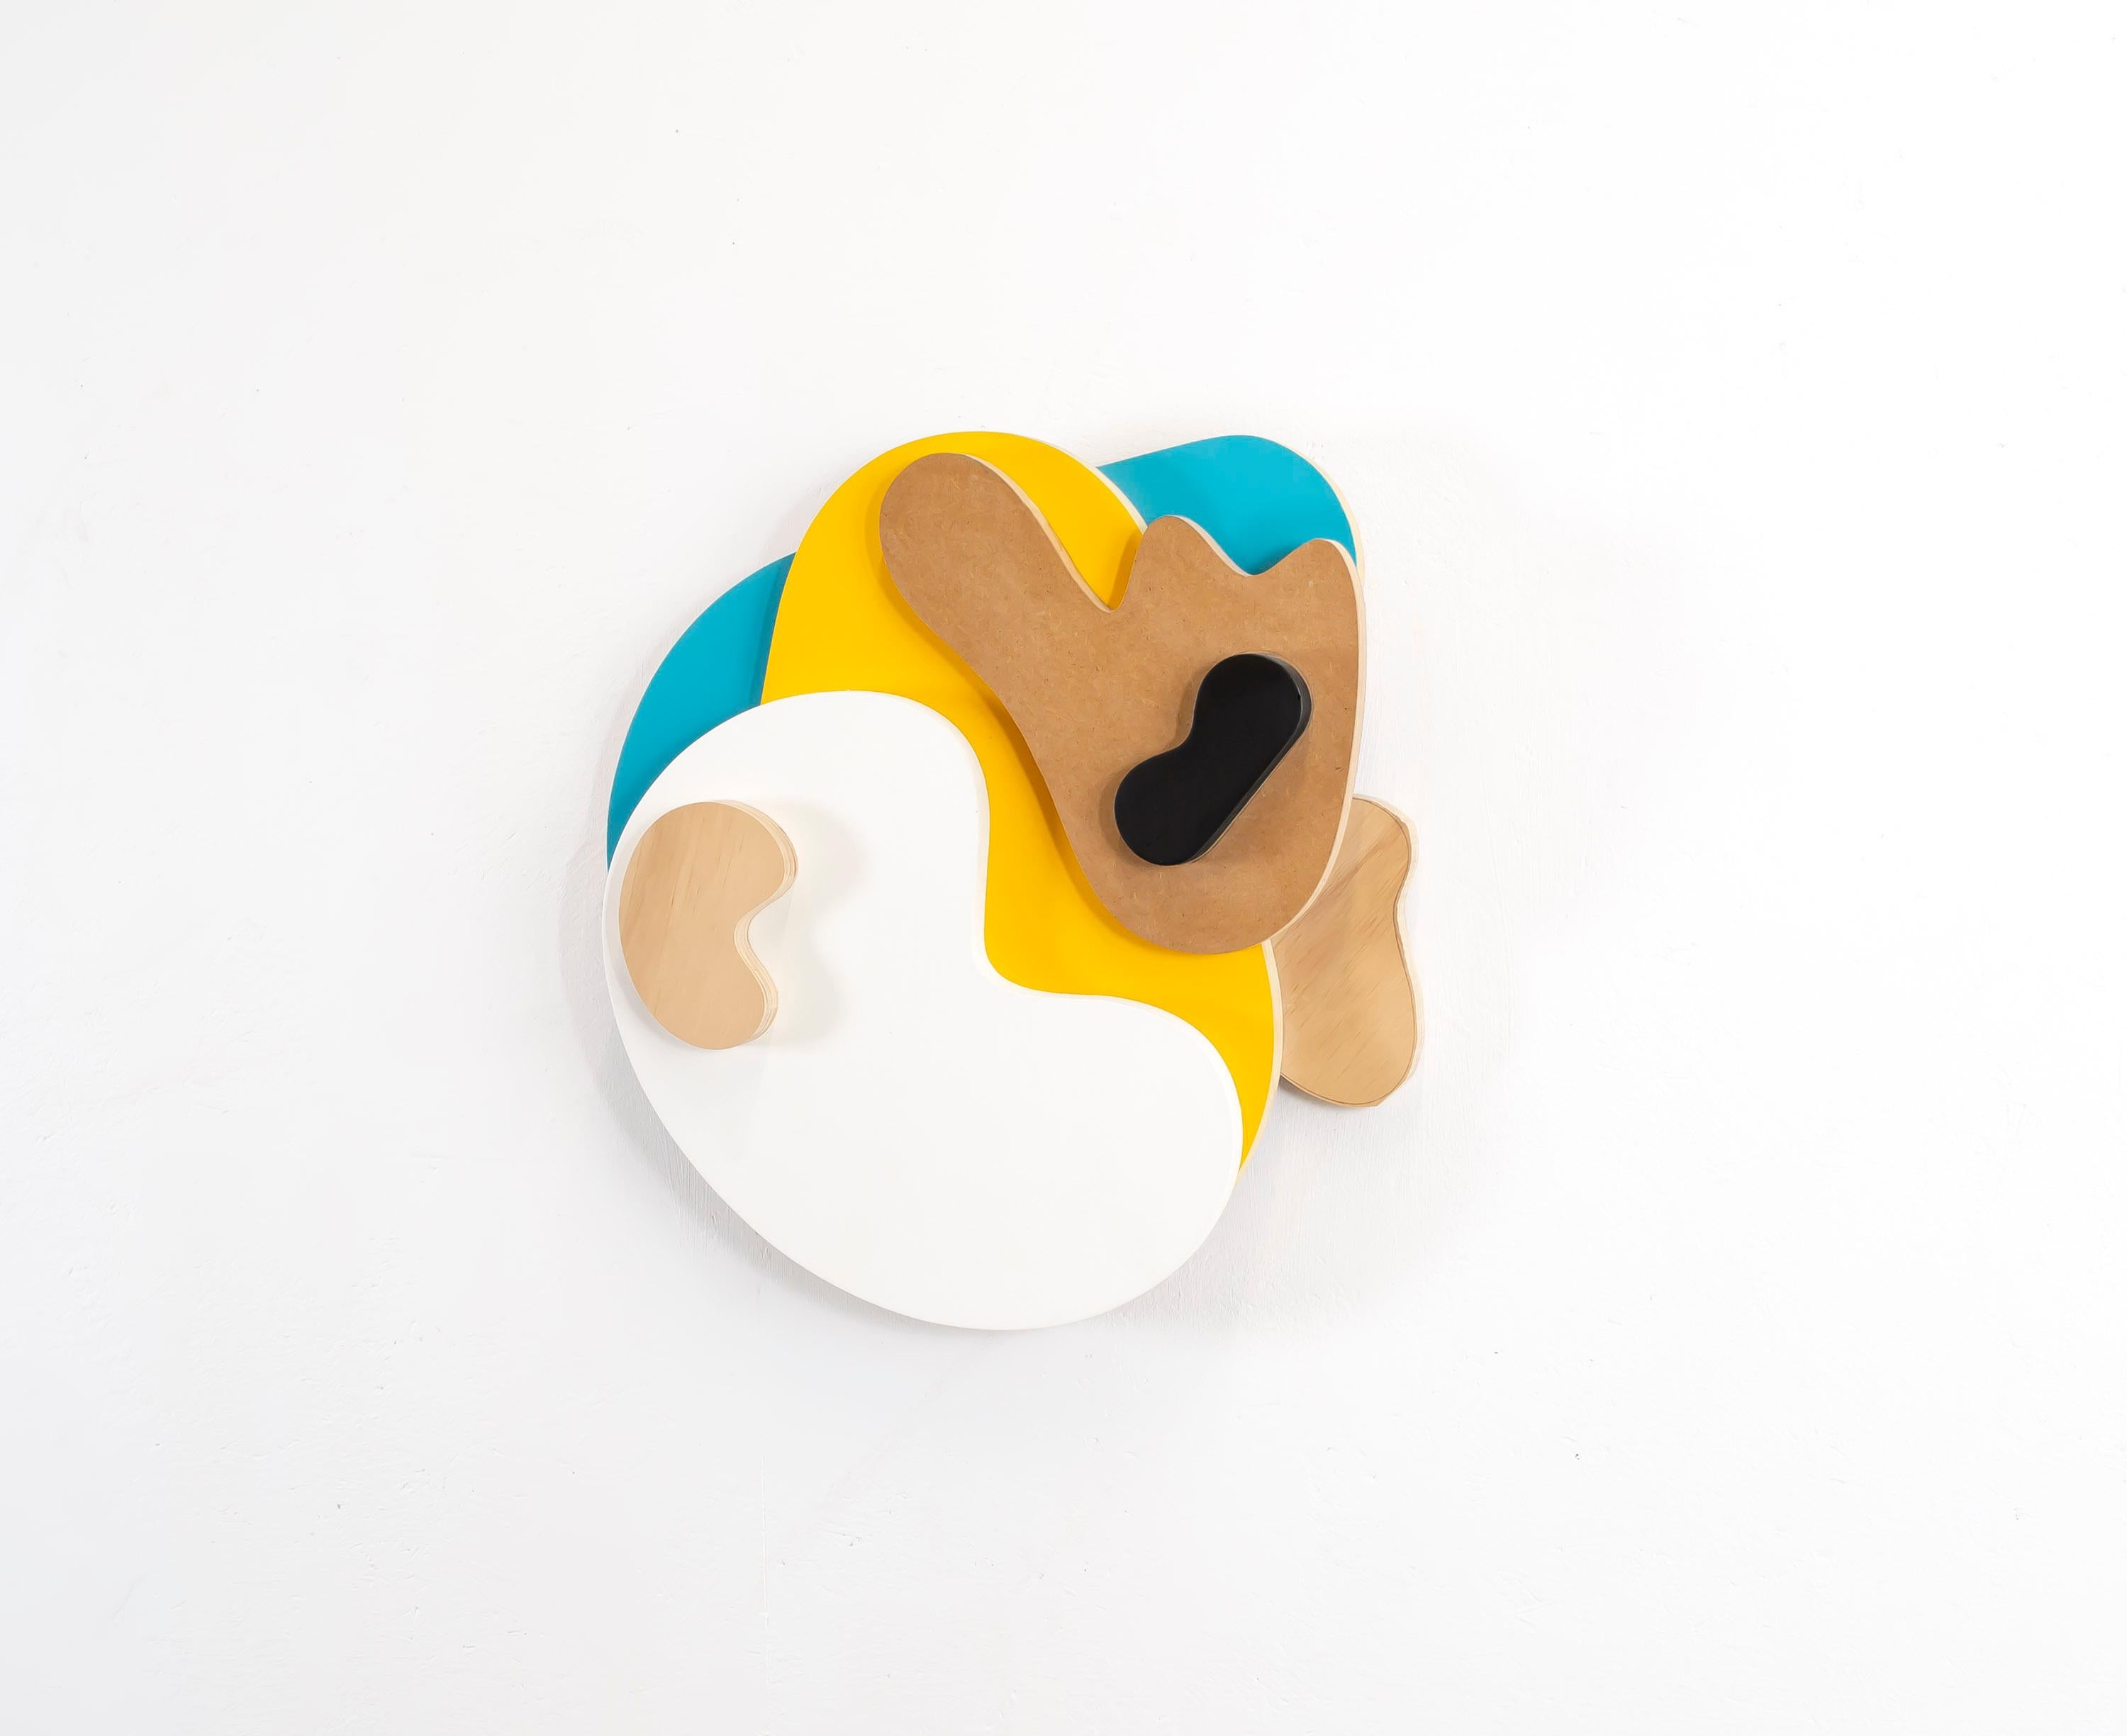 «A happy little accident» wall relief comprised of coloured, odd rounded shapes  - Contemporary Mixed Media Art by Dustin Cook